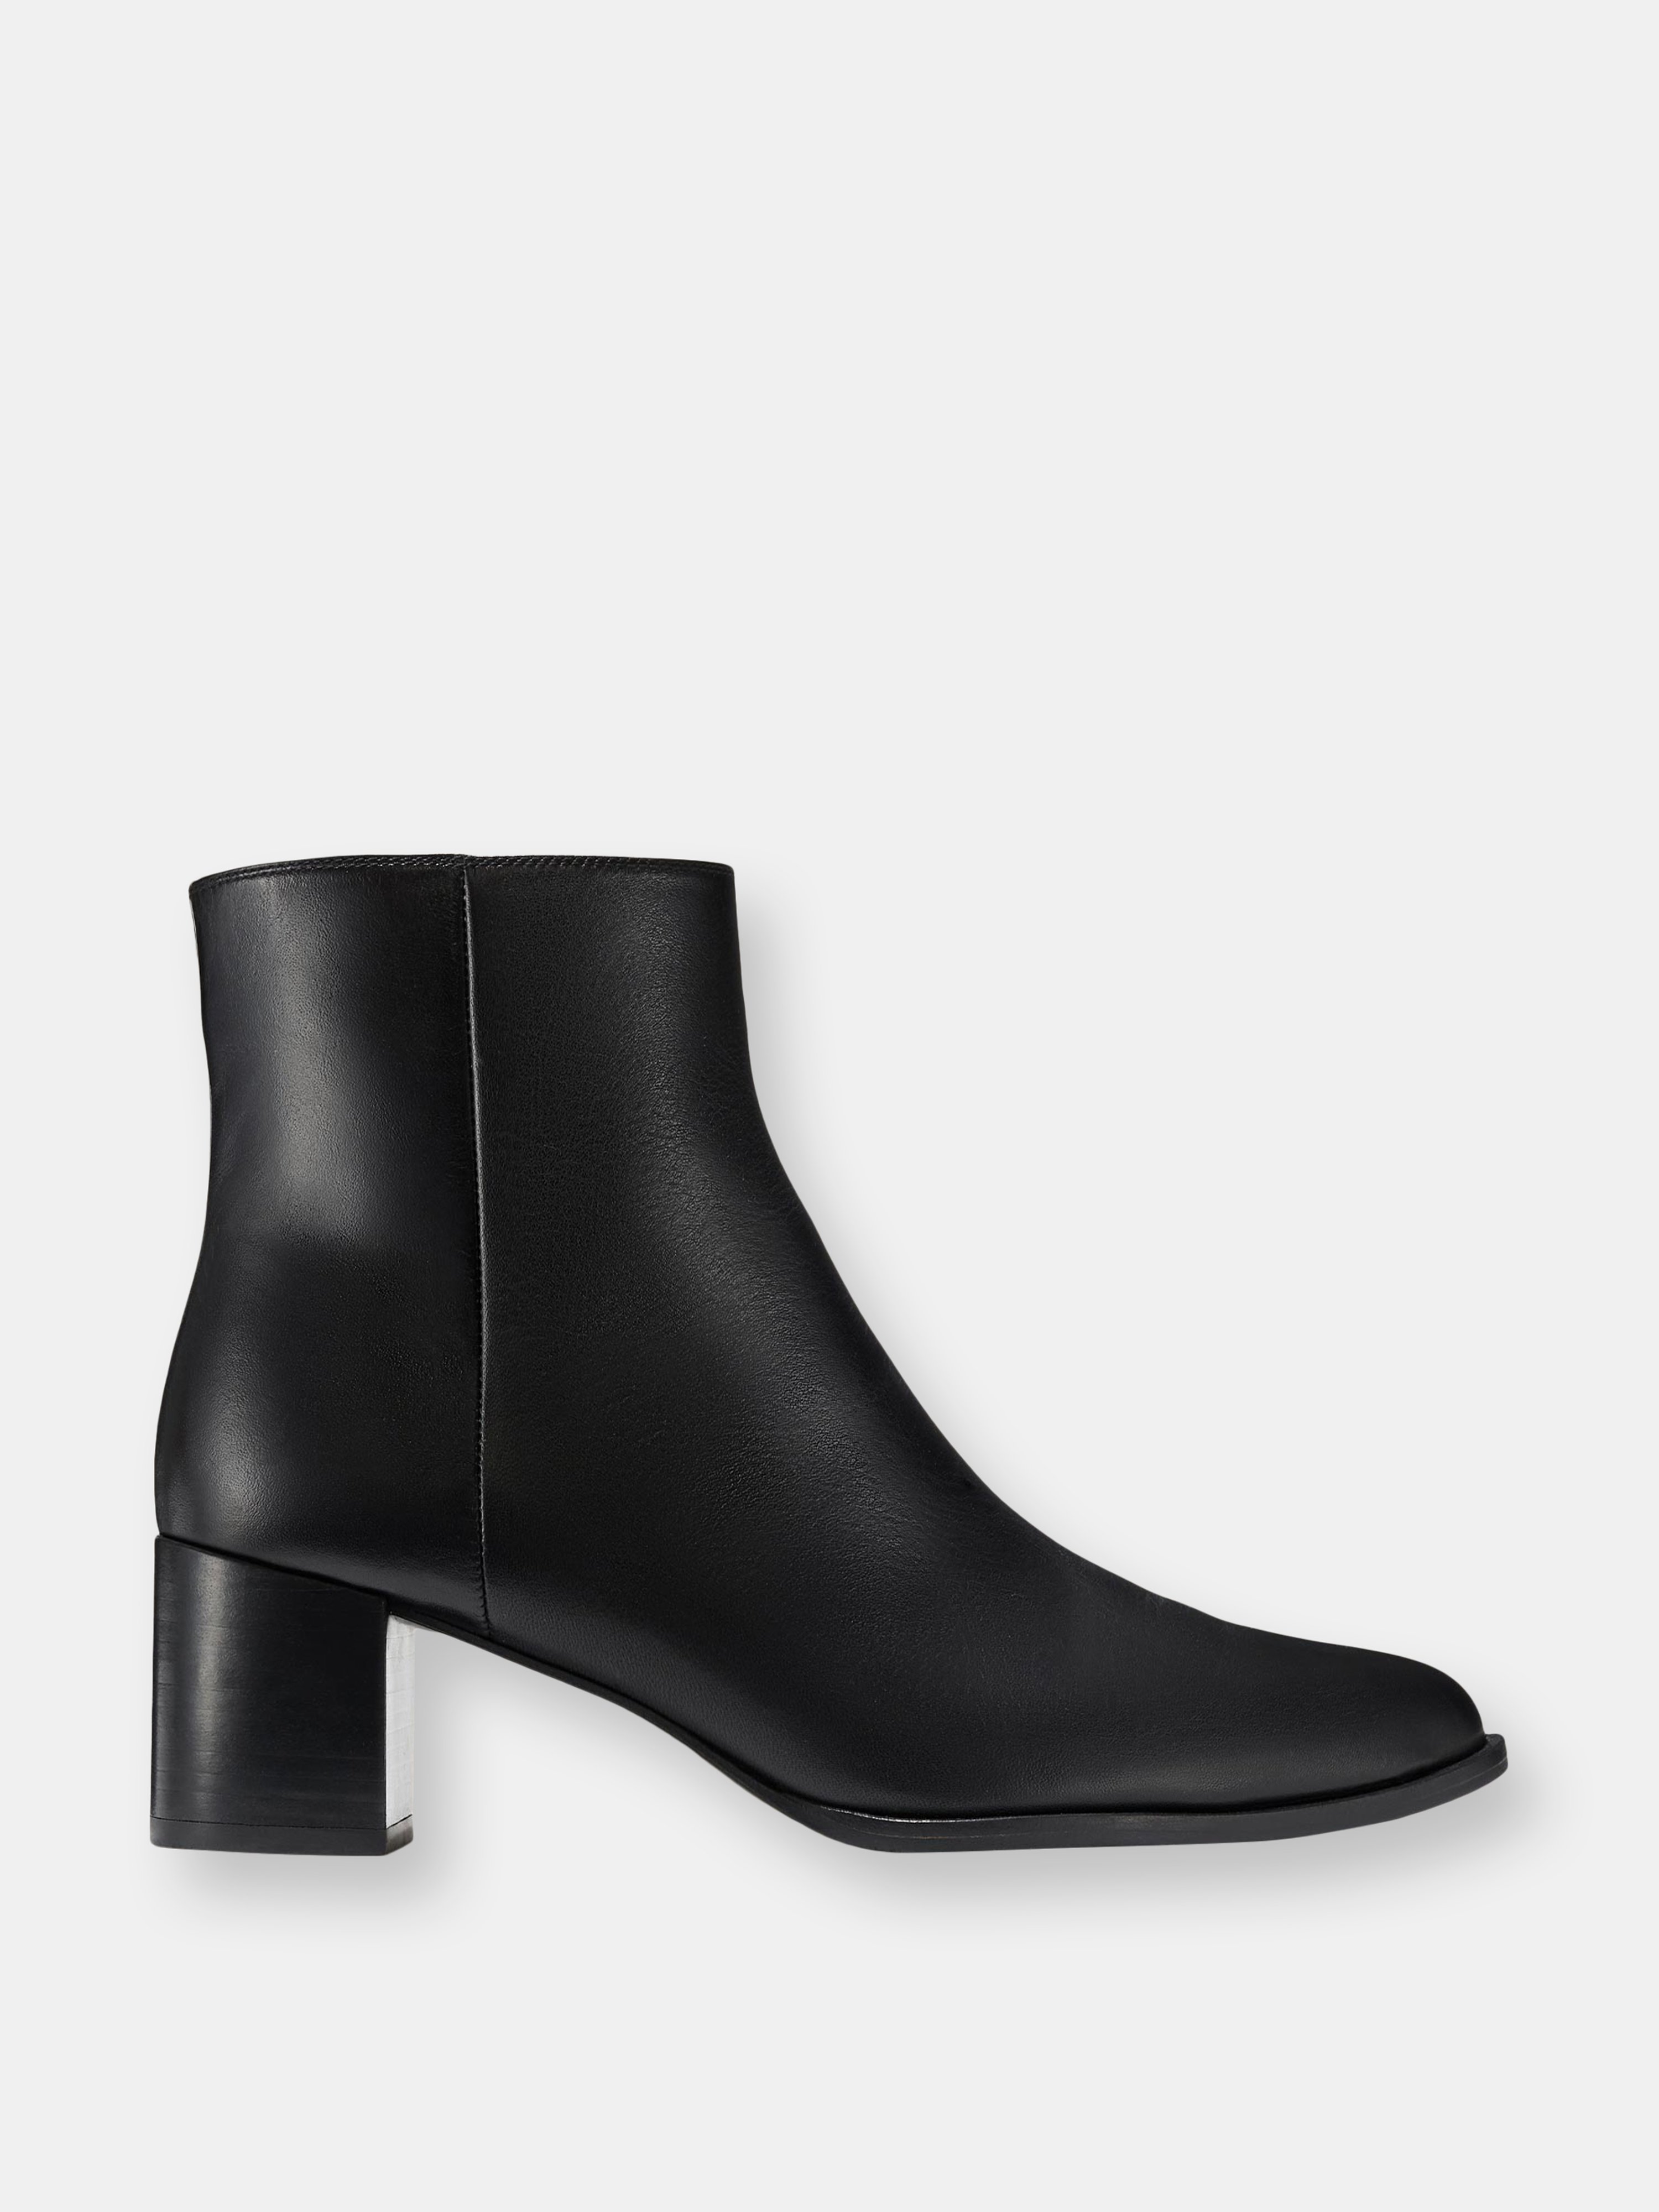 MARGAUX MARGAUX THE DOWNTOWN BOOT